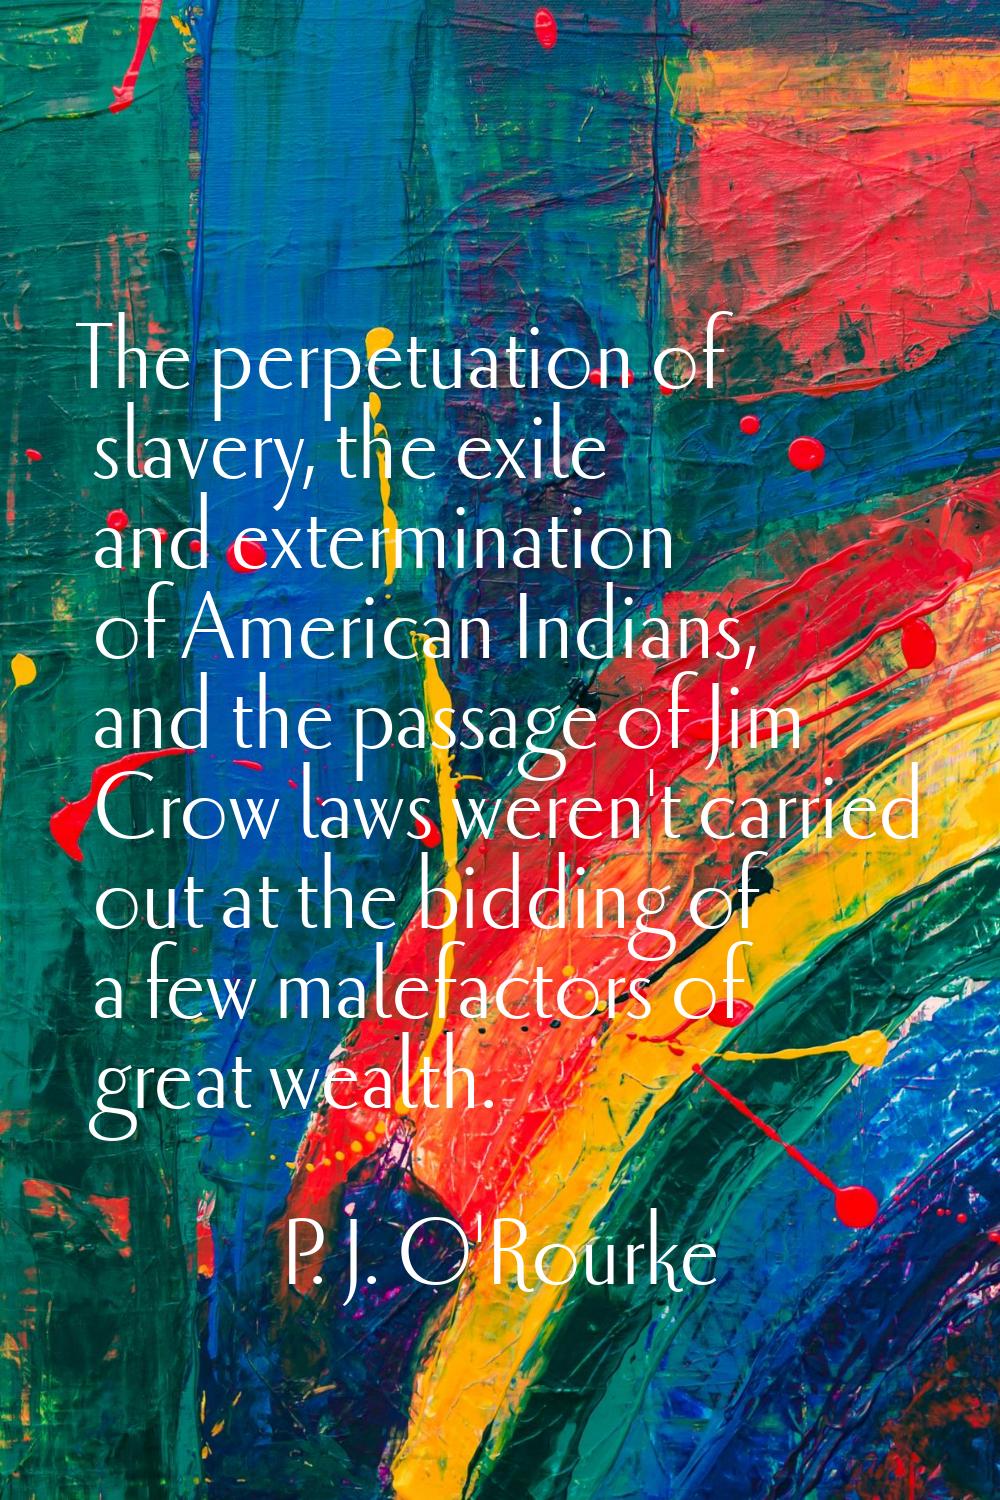 The perpetuation of slavery, the exile and extermination of American Indians, and the passage of Ji